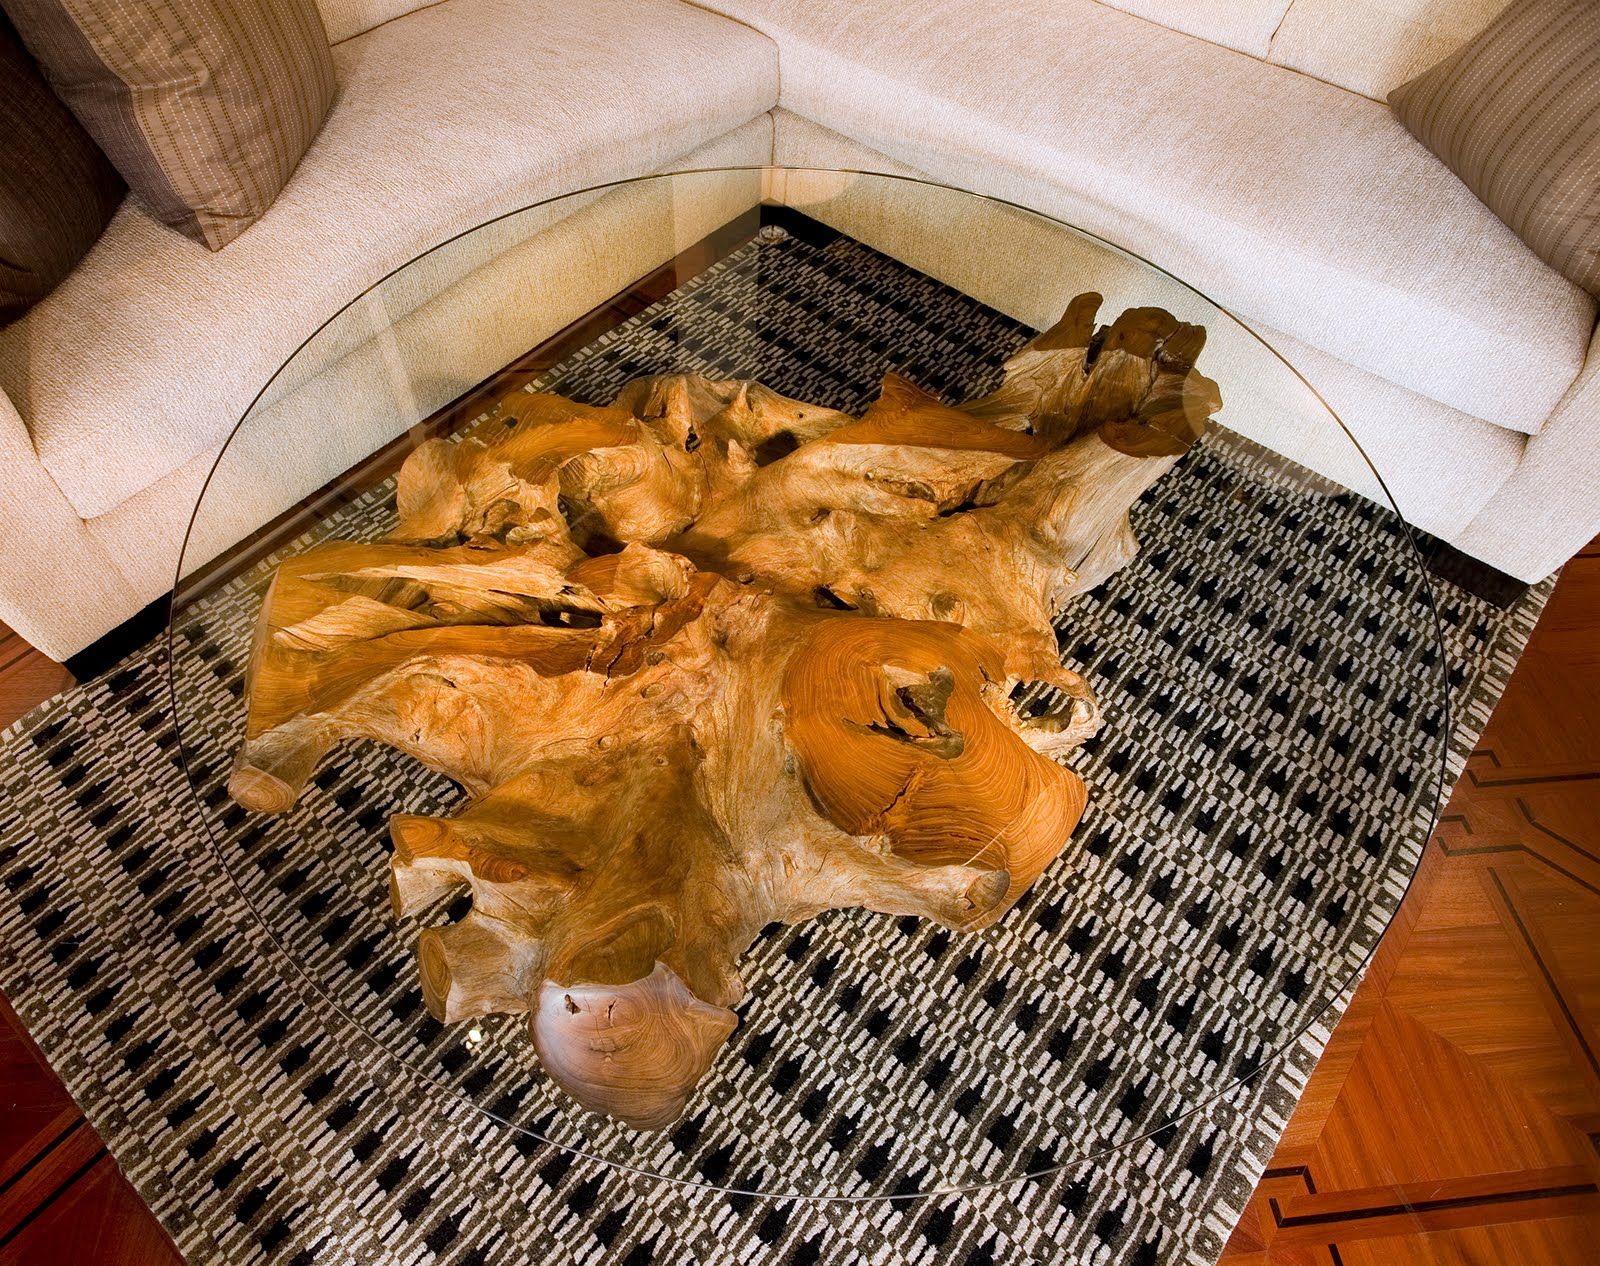 Tree Trunk Coffee Table With Glass Top Too Much Brown Furniture A National Epidemic Furniture Inspiration Ideas Simple And Neat Look (View 8 of 9)